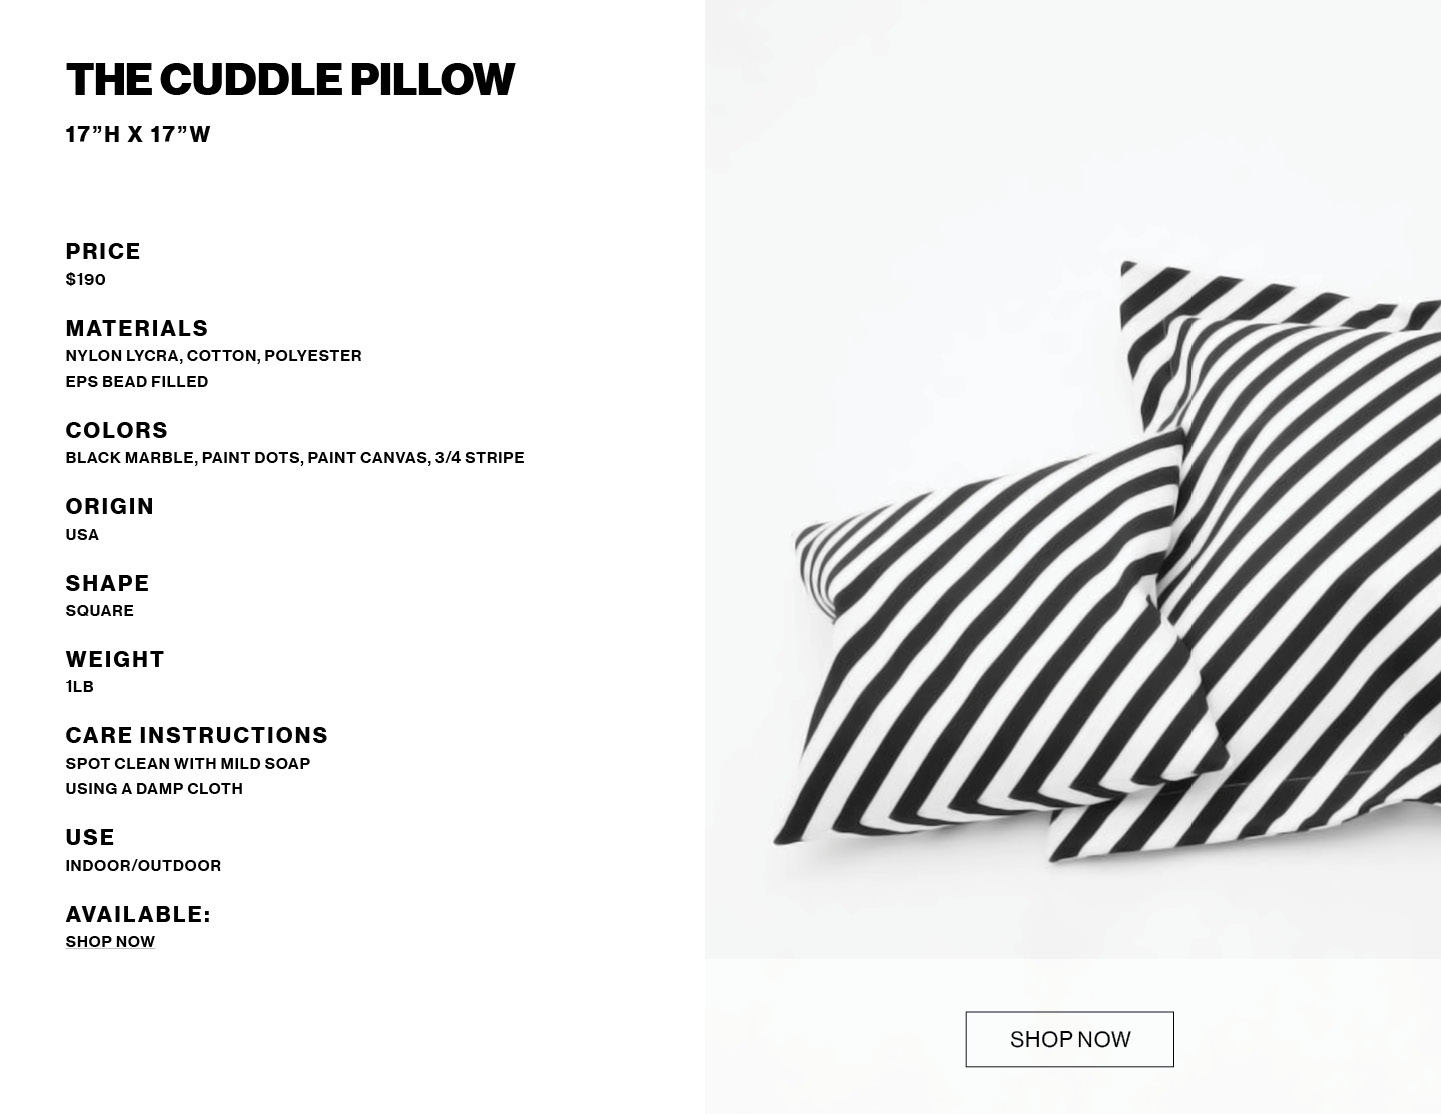 The Cuddle Pillow product info